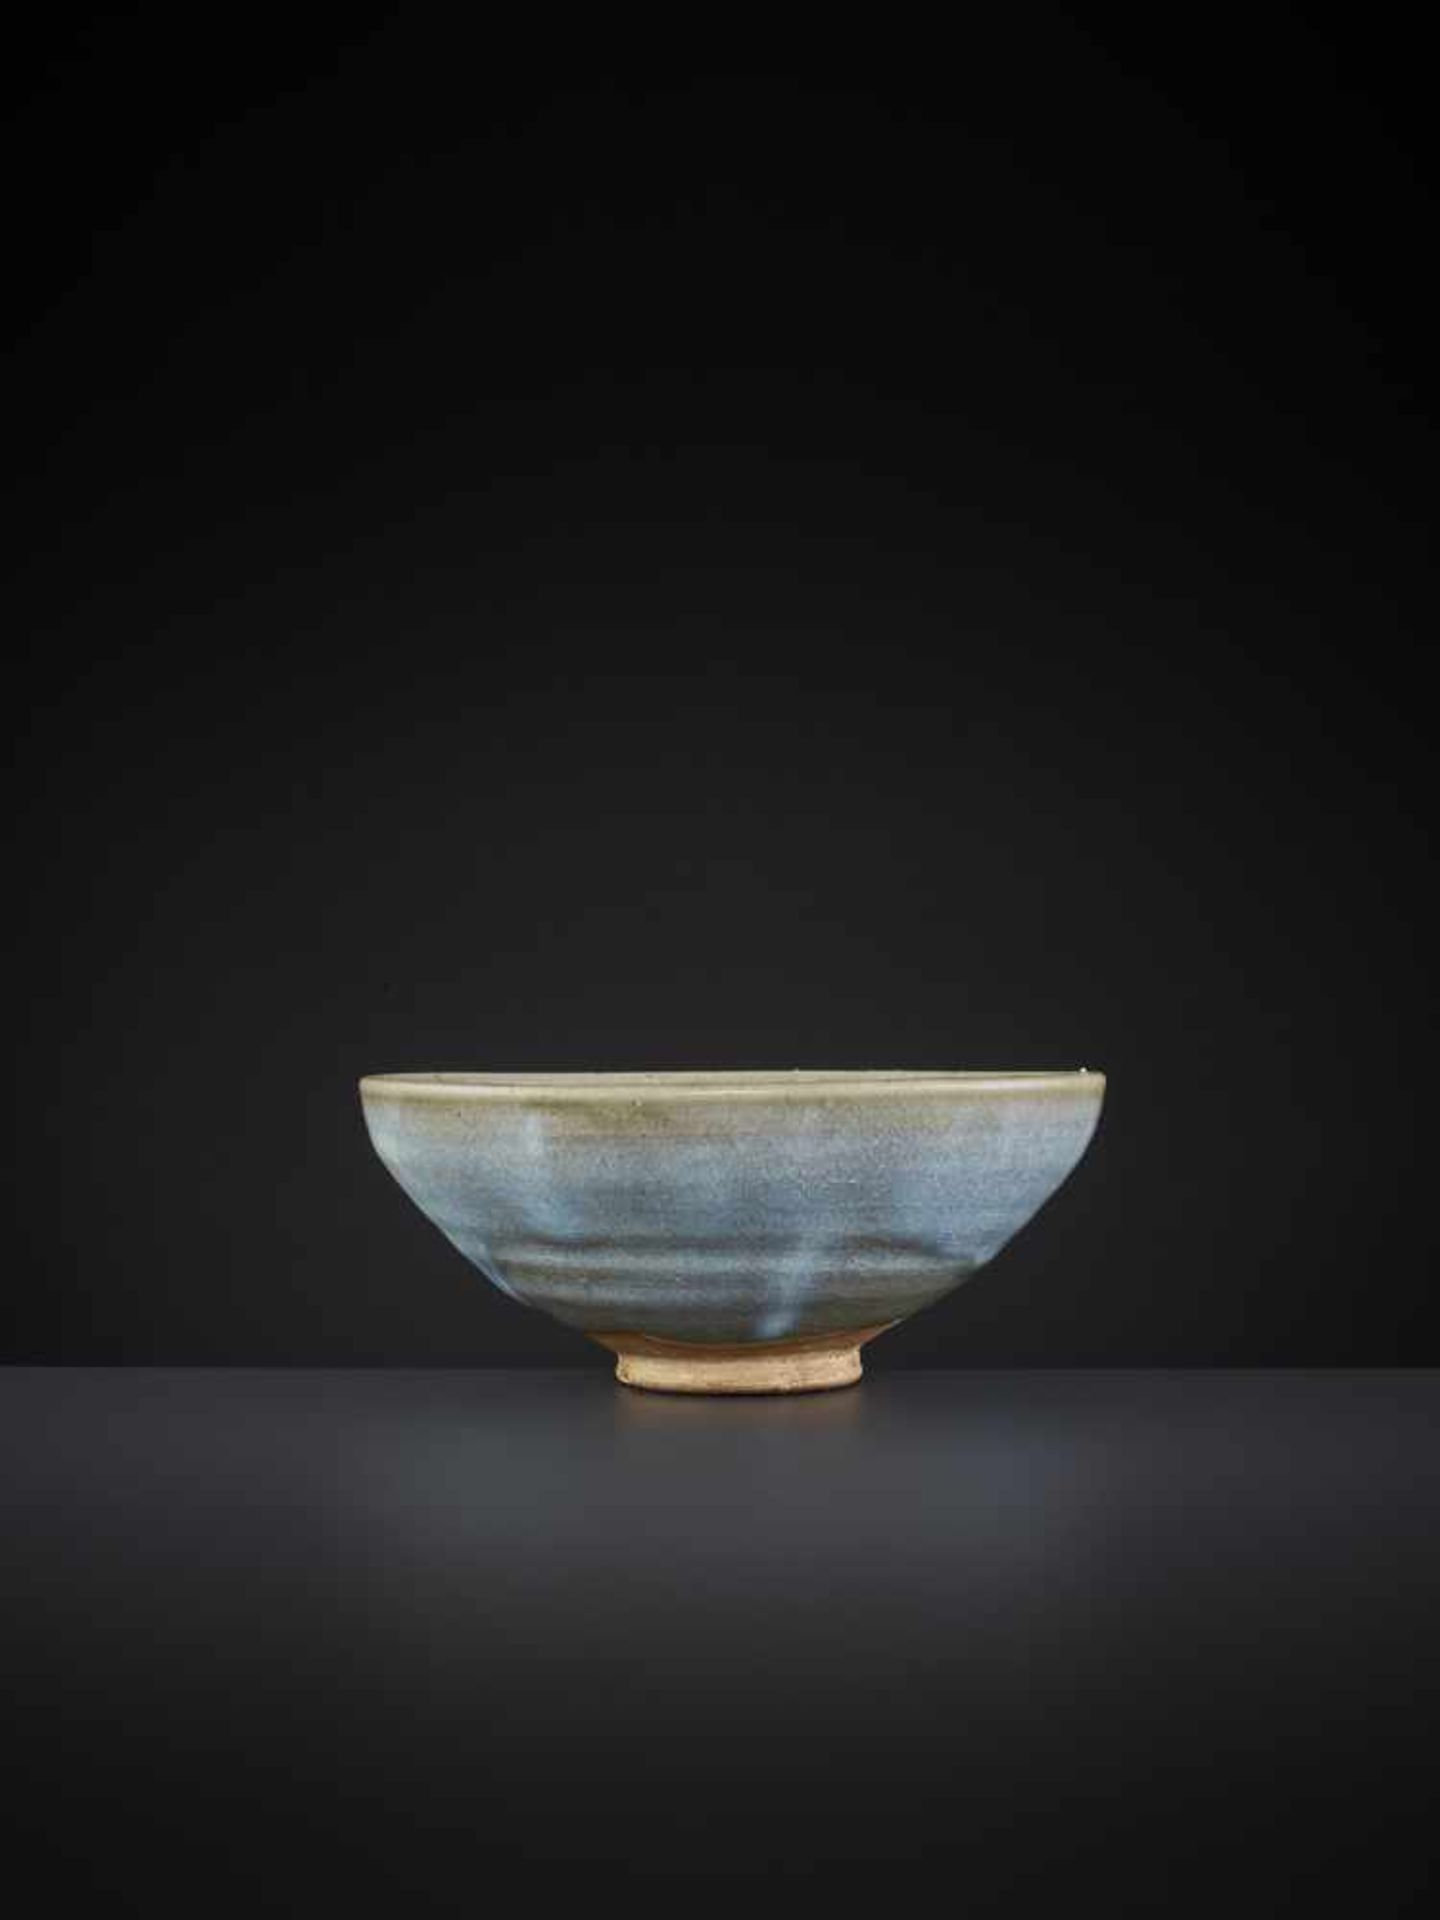 A JUNYAO CONICAL BOWL, 13TH-14TH CENTURY - Image 5 of 13